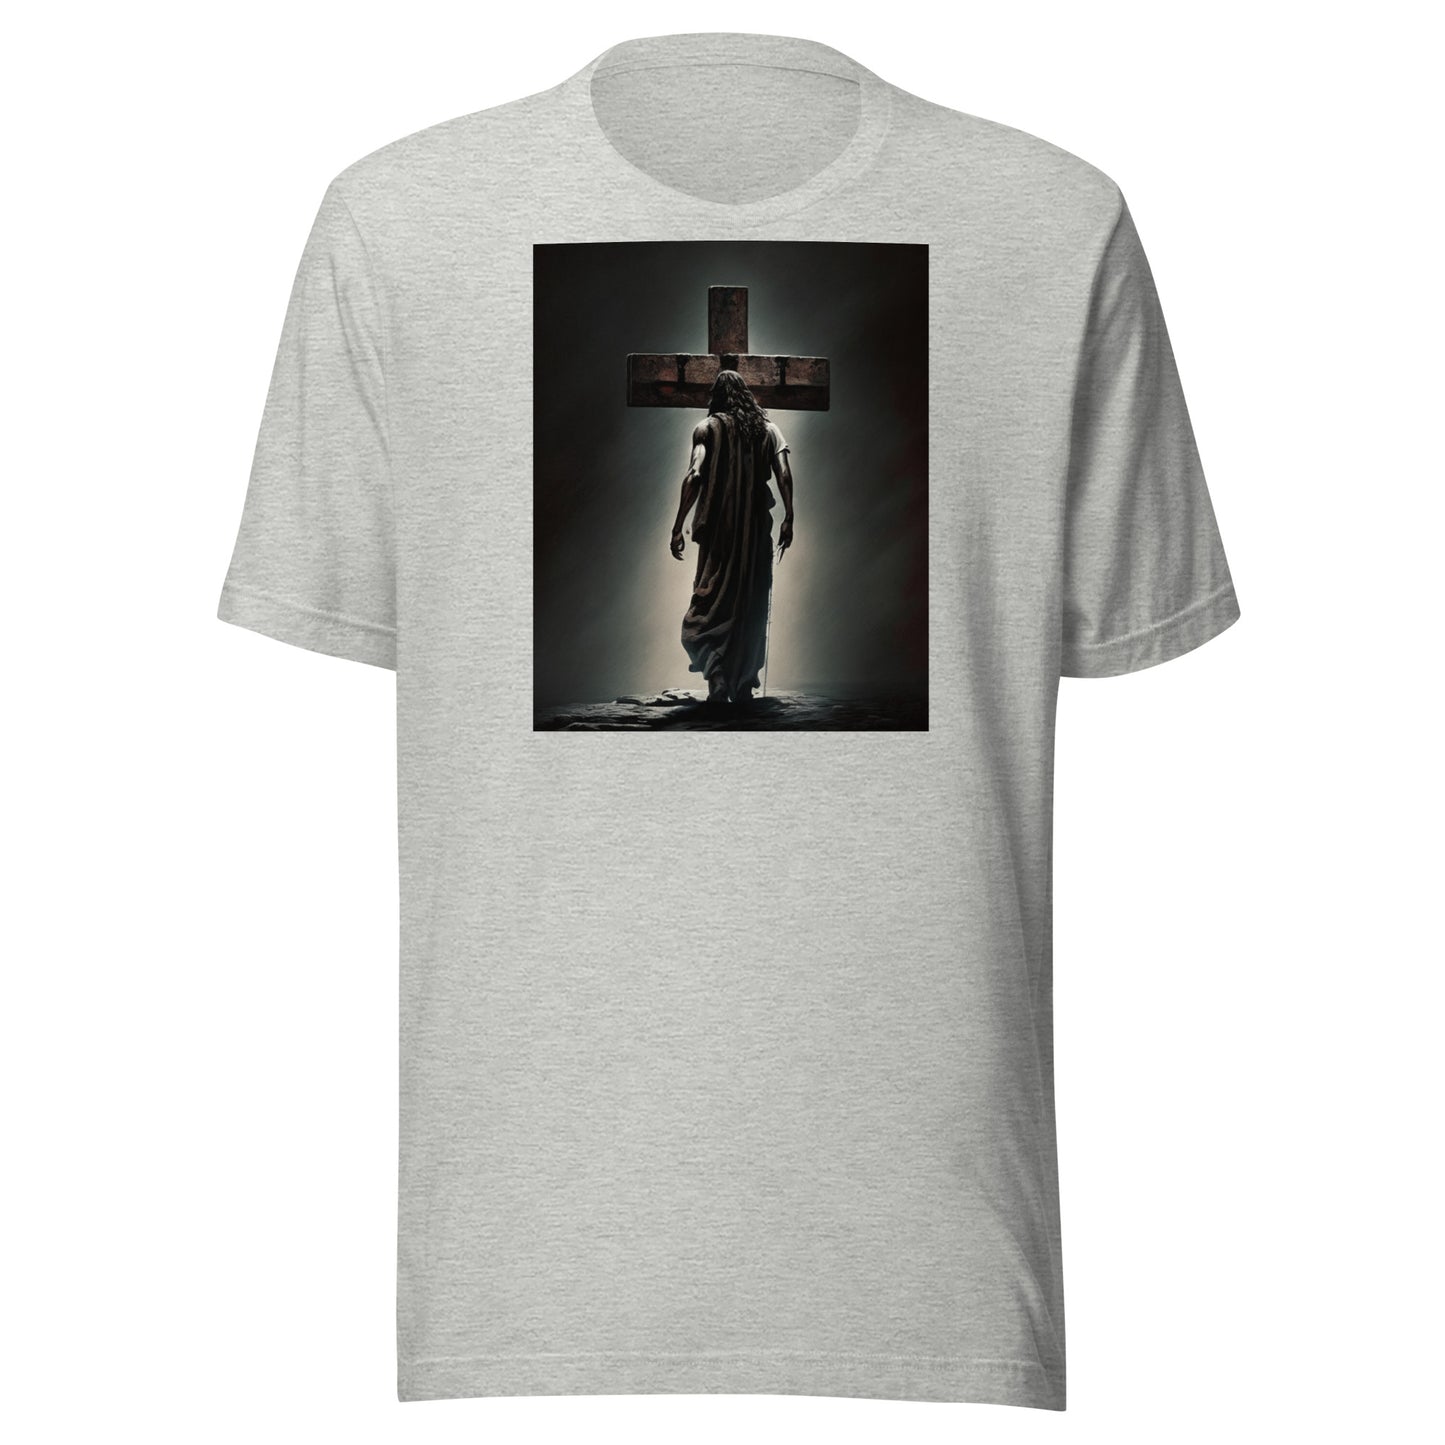 Christ Facing the Cross Women's Christian Classic T-Shirt Athletic Heather